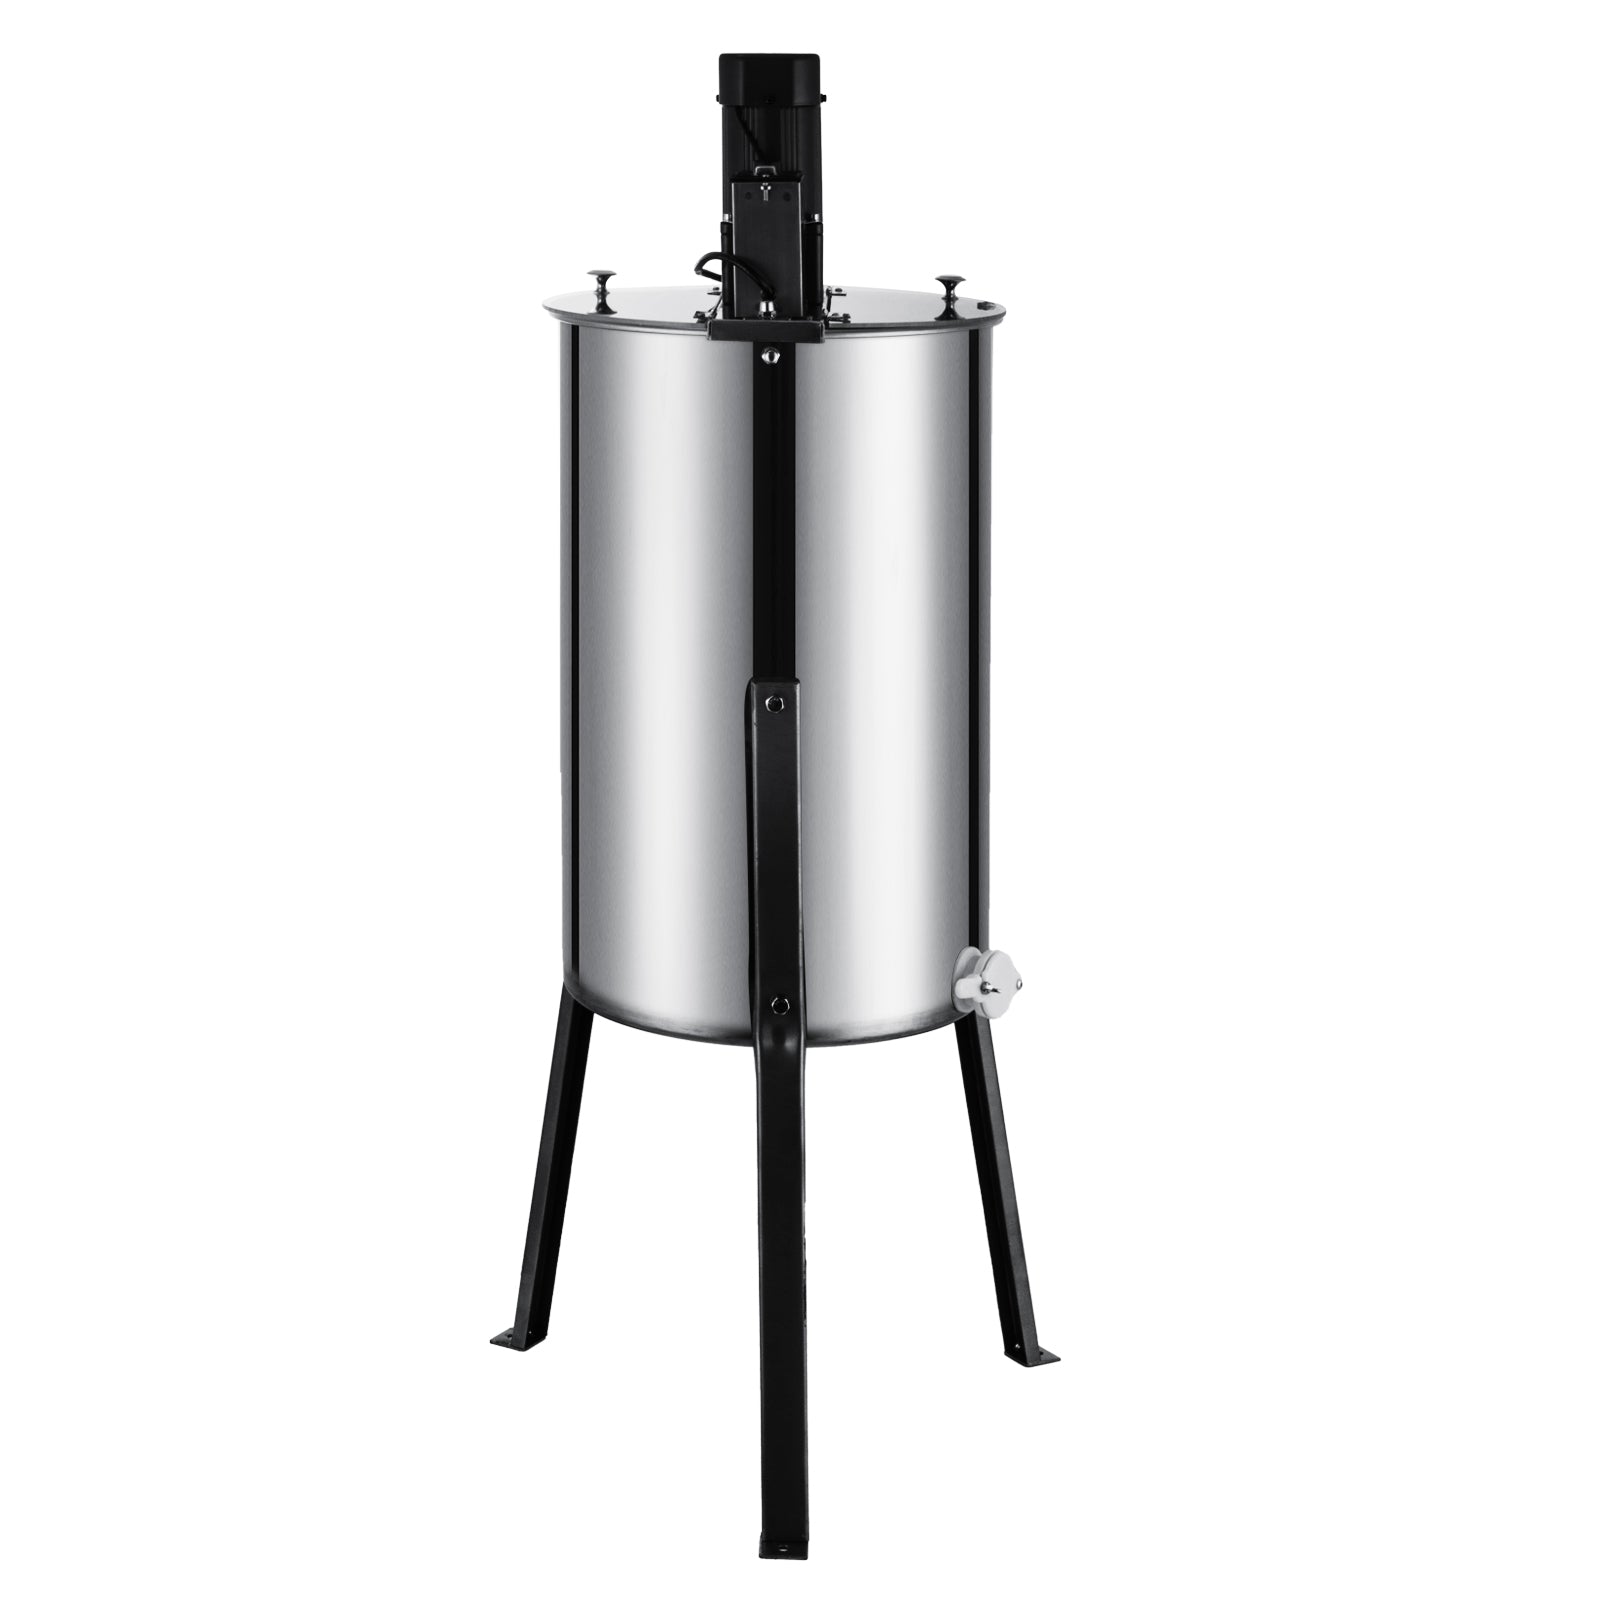 honey extractor for sale near me